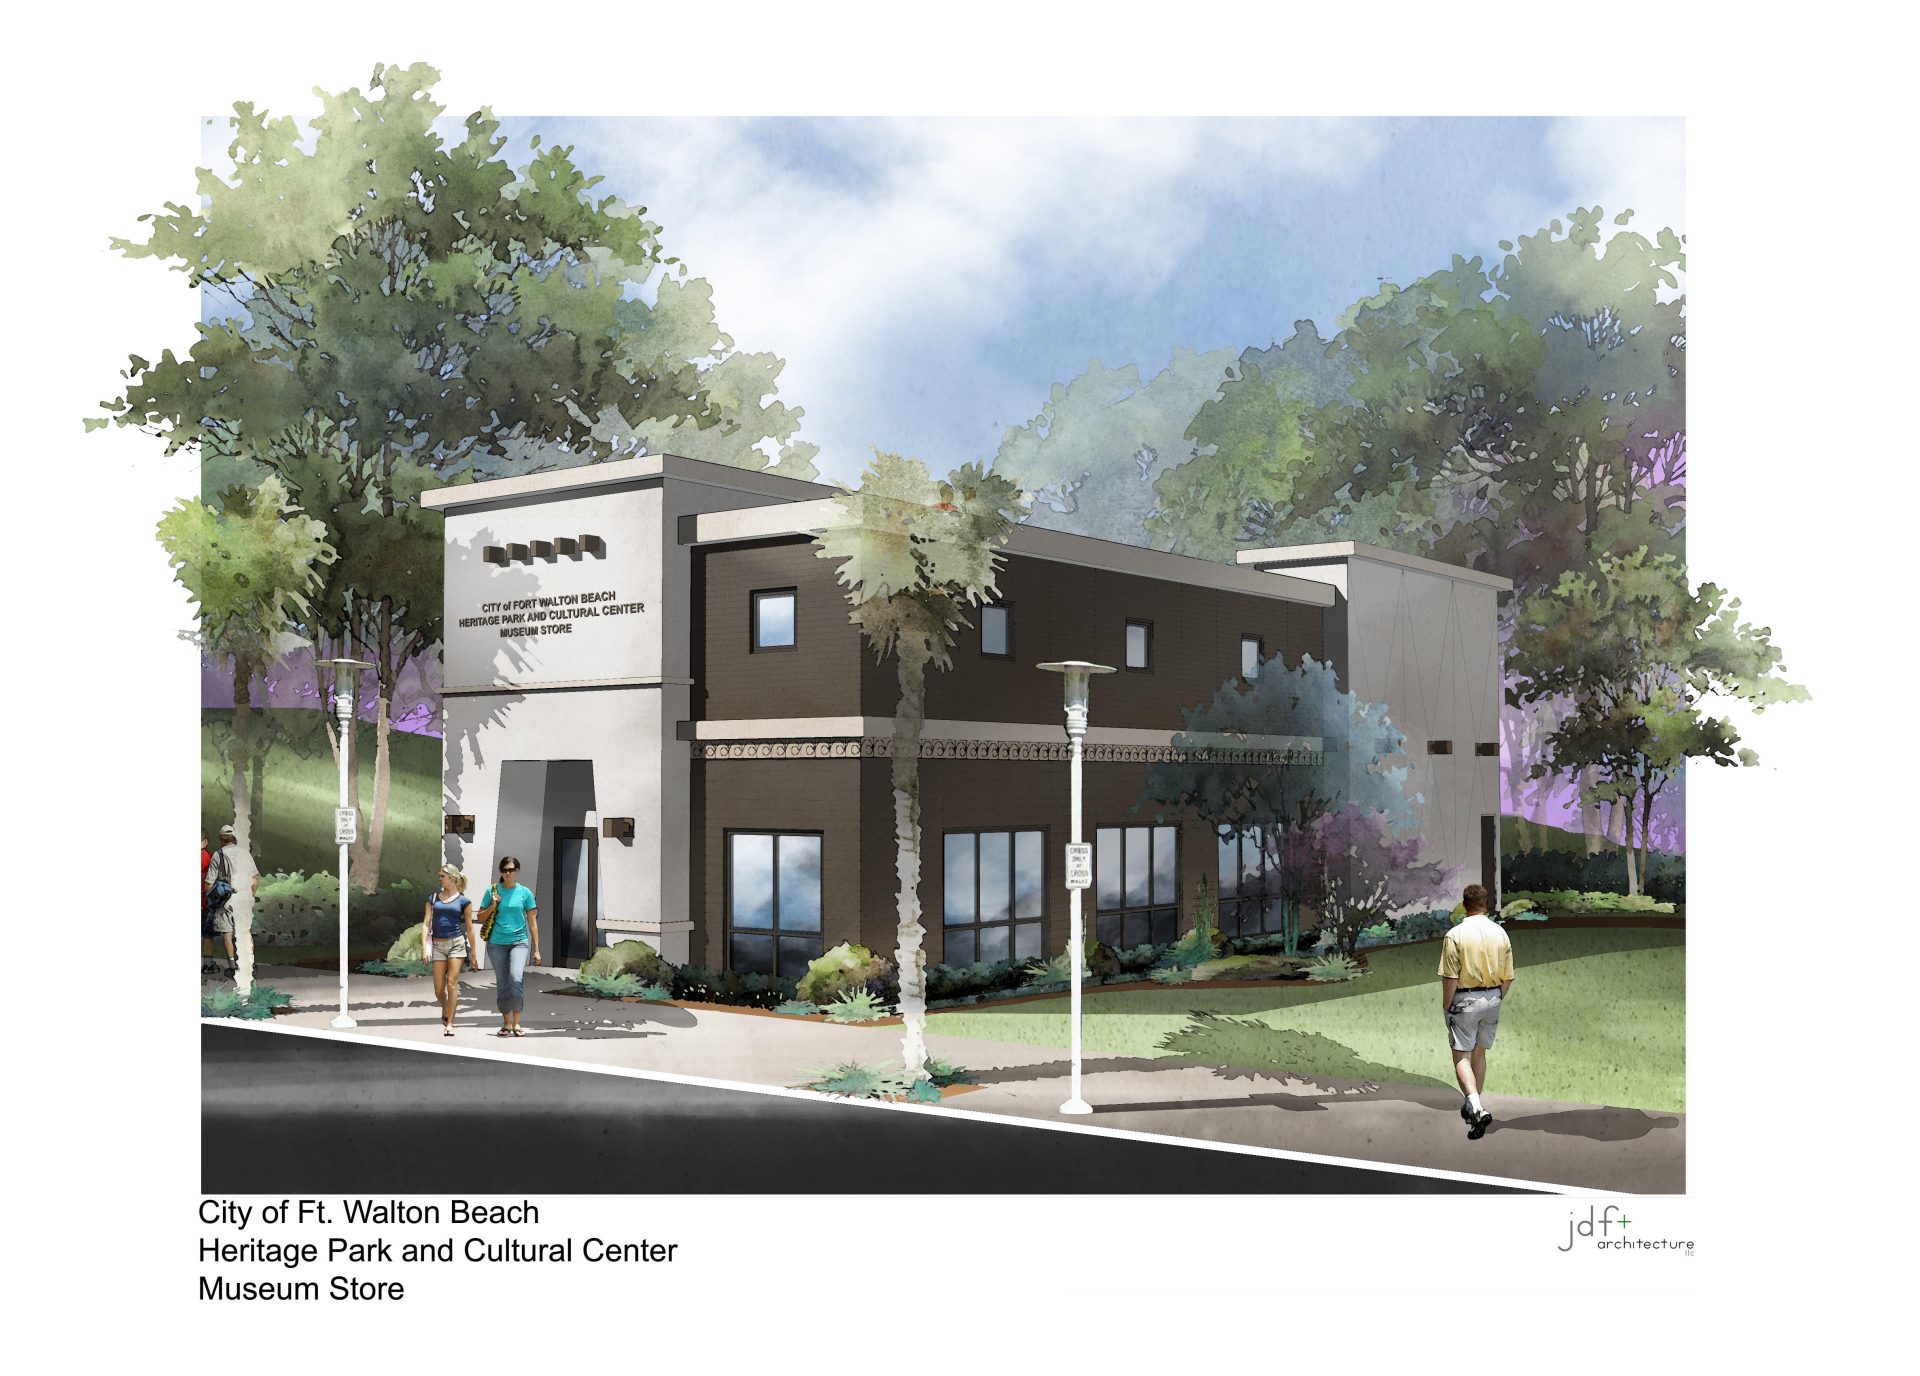 Expansion of the Fort Walton Beach’s Heritage and Cultural Museum Set To Begin